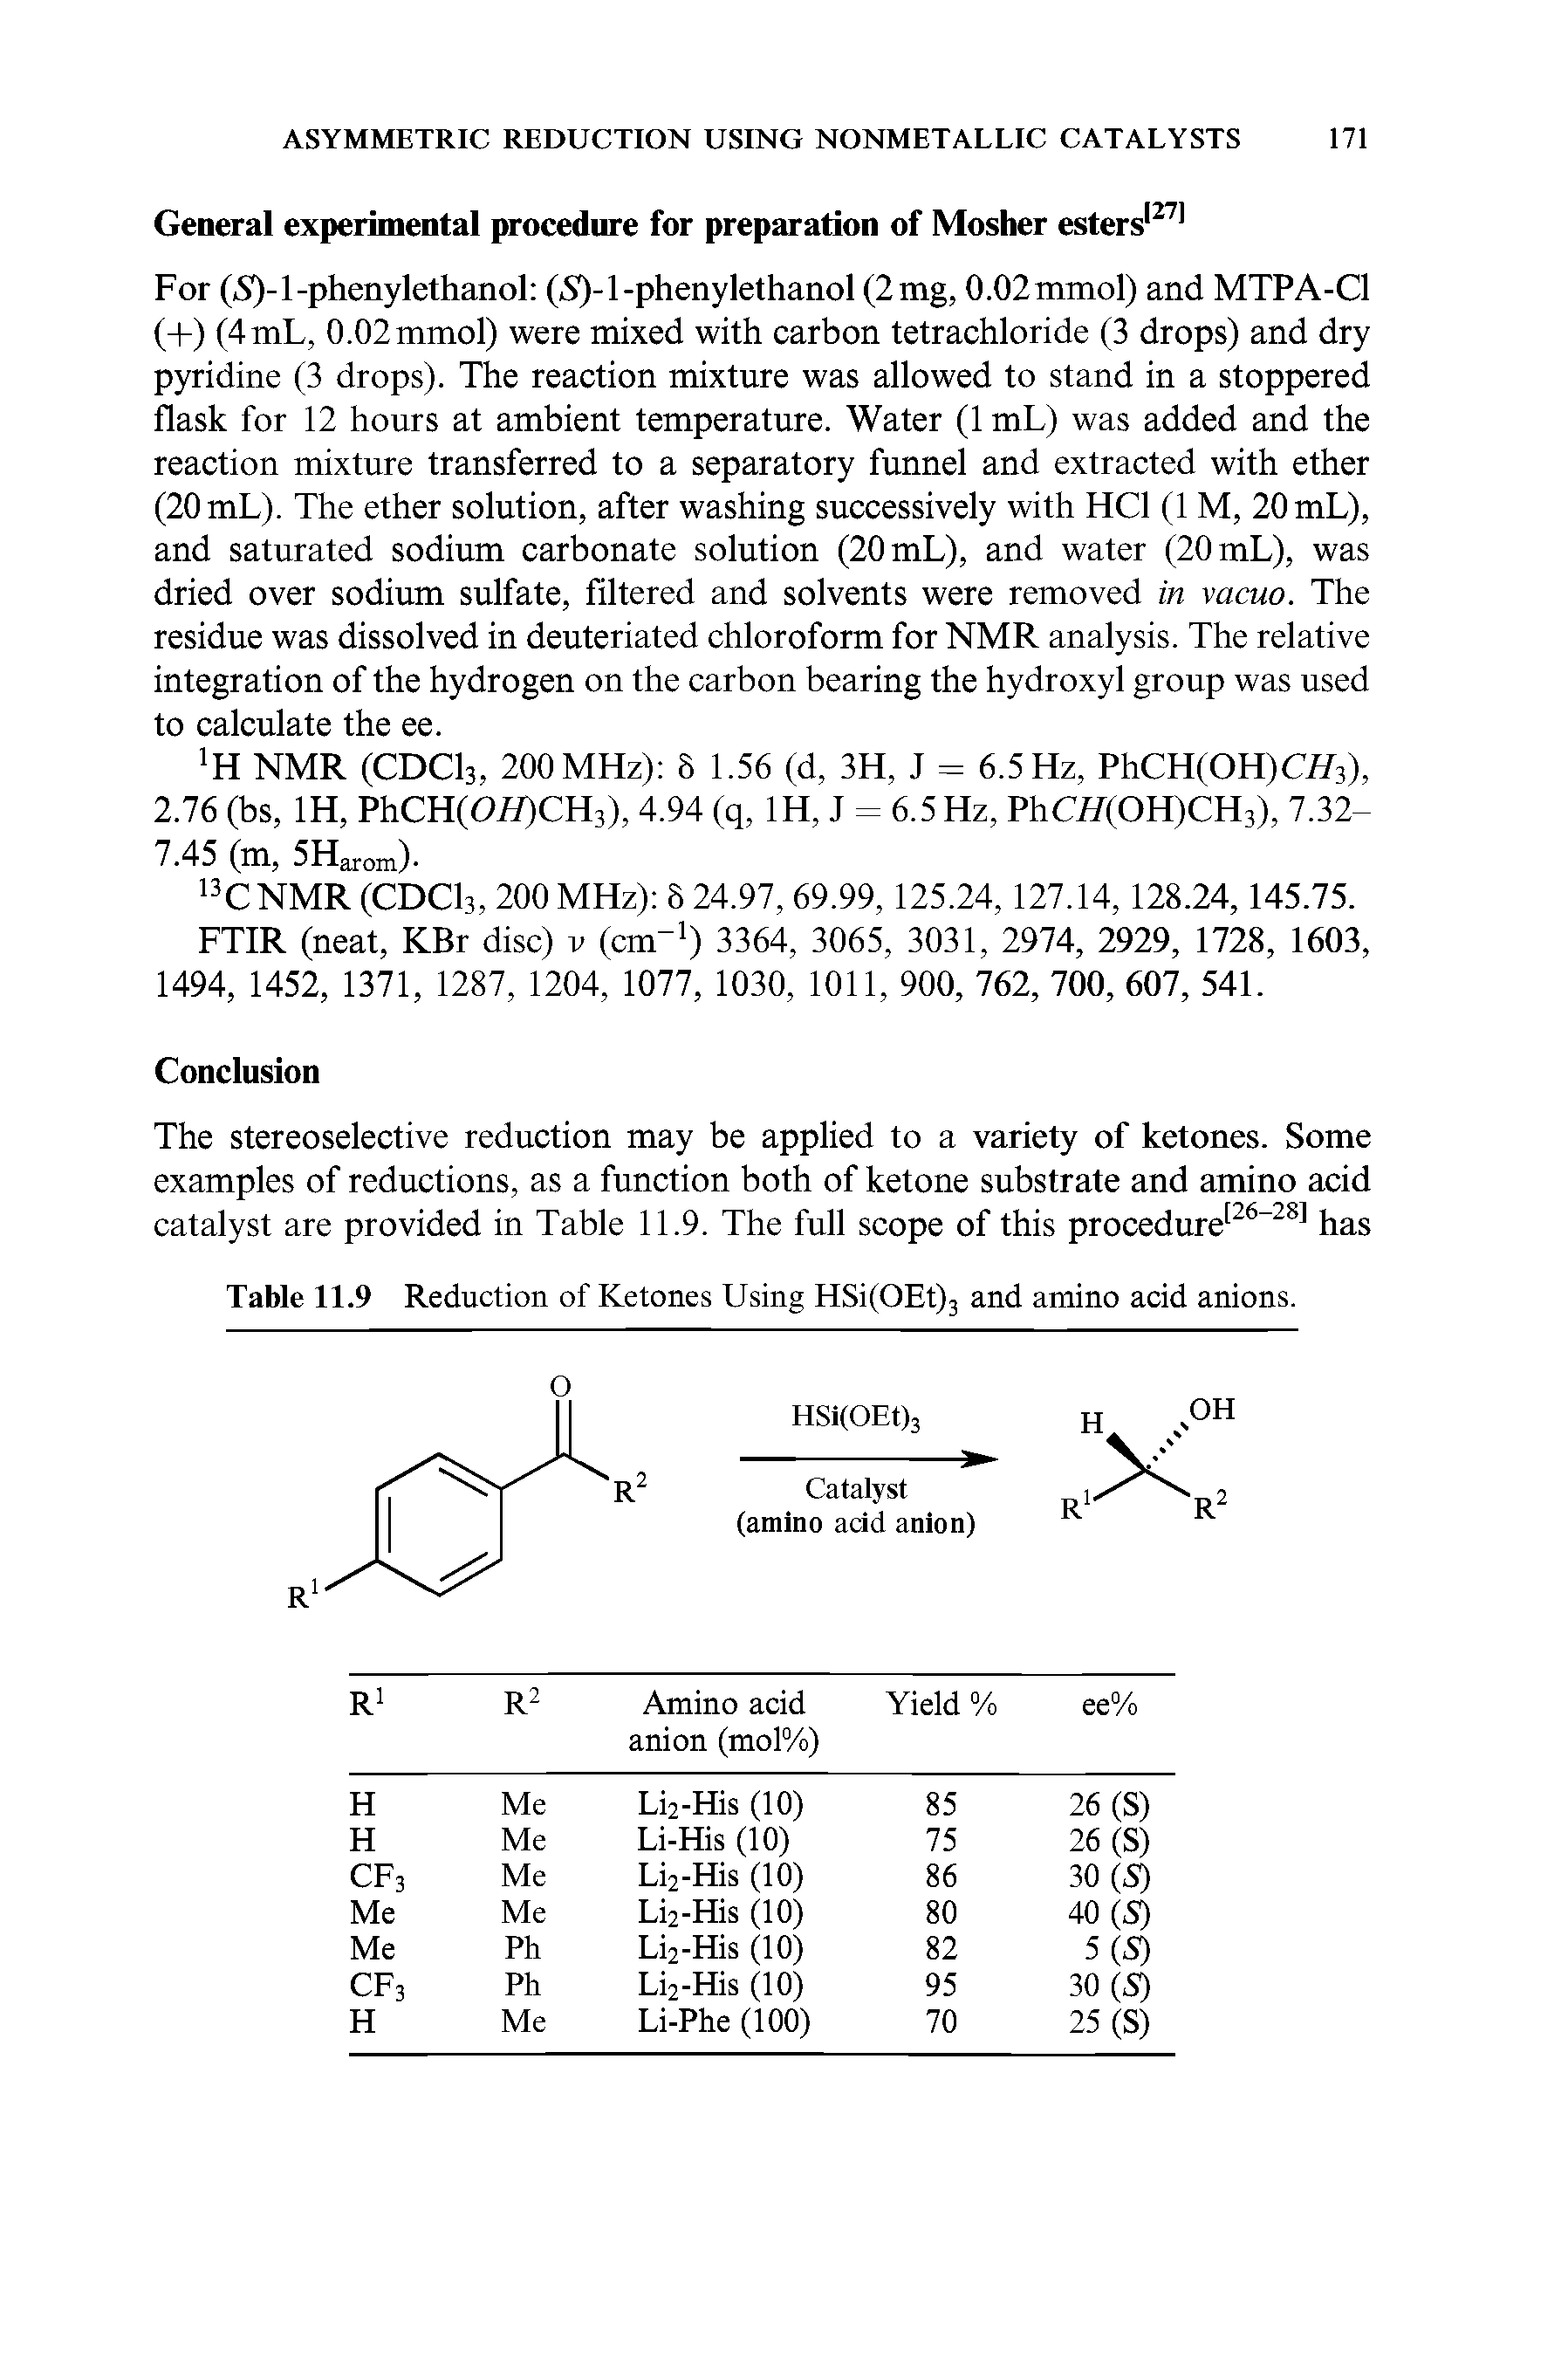 Table 11.9 Reduction of Ketones Using HSi(OEt)3 and amino acid anions.